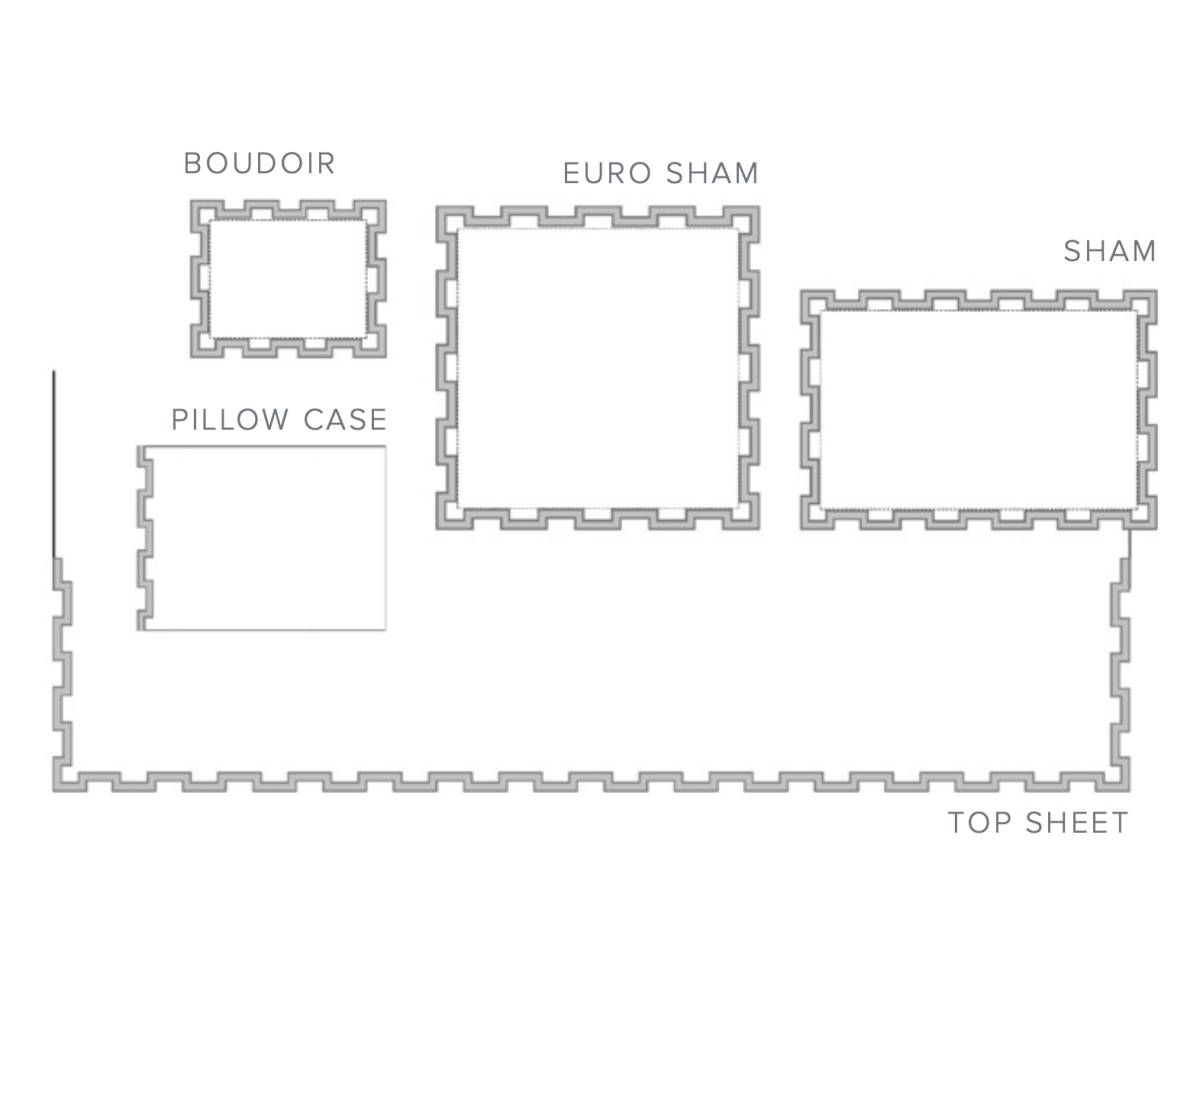 Dea Linens Andrea Embroidery Bedding Layout - View 2